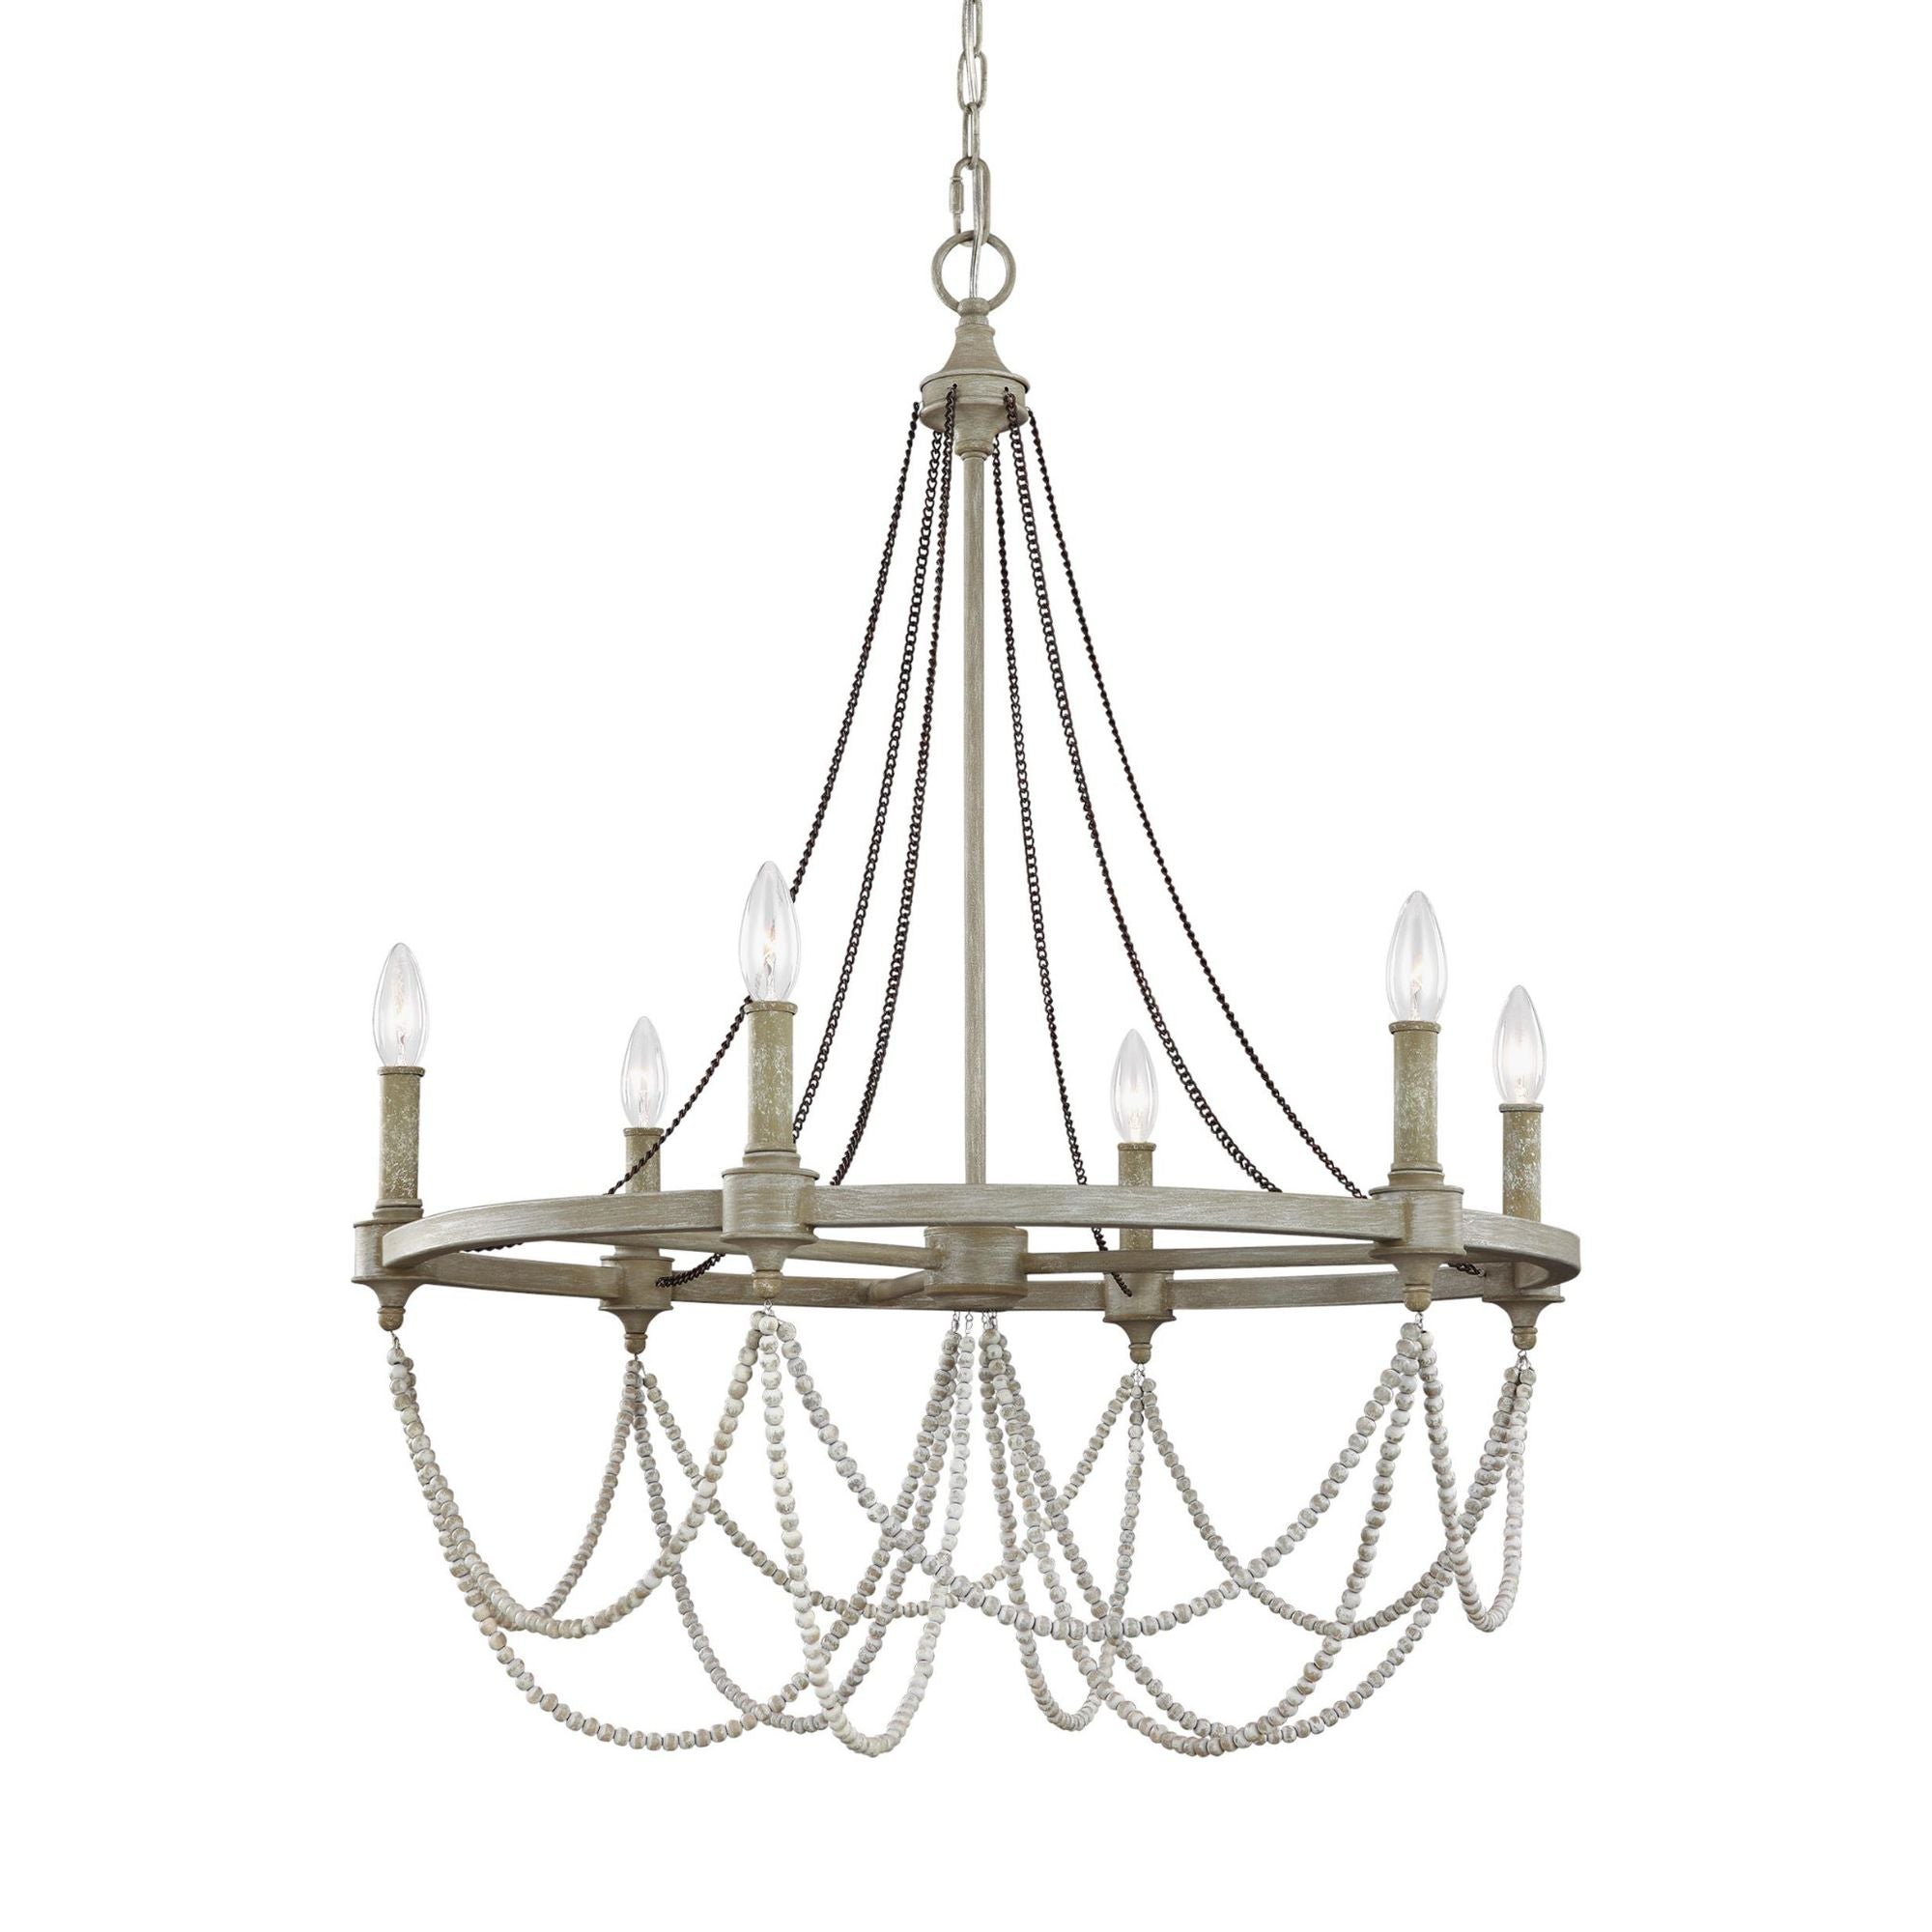 Sean Lavin Beverly Medium Chandelier in French Washed Oak / Distressed White Wood